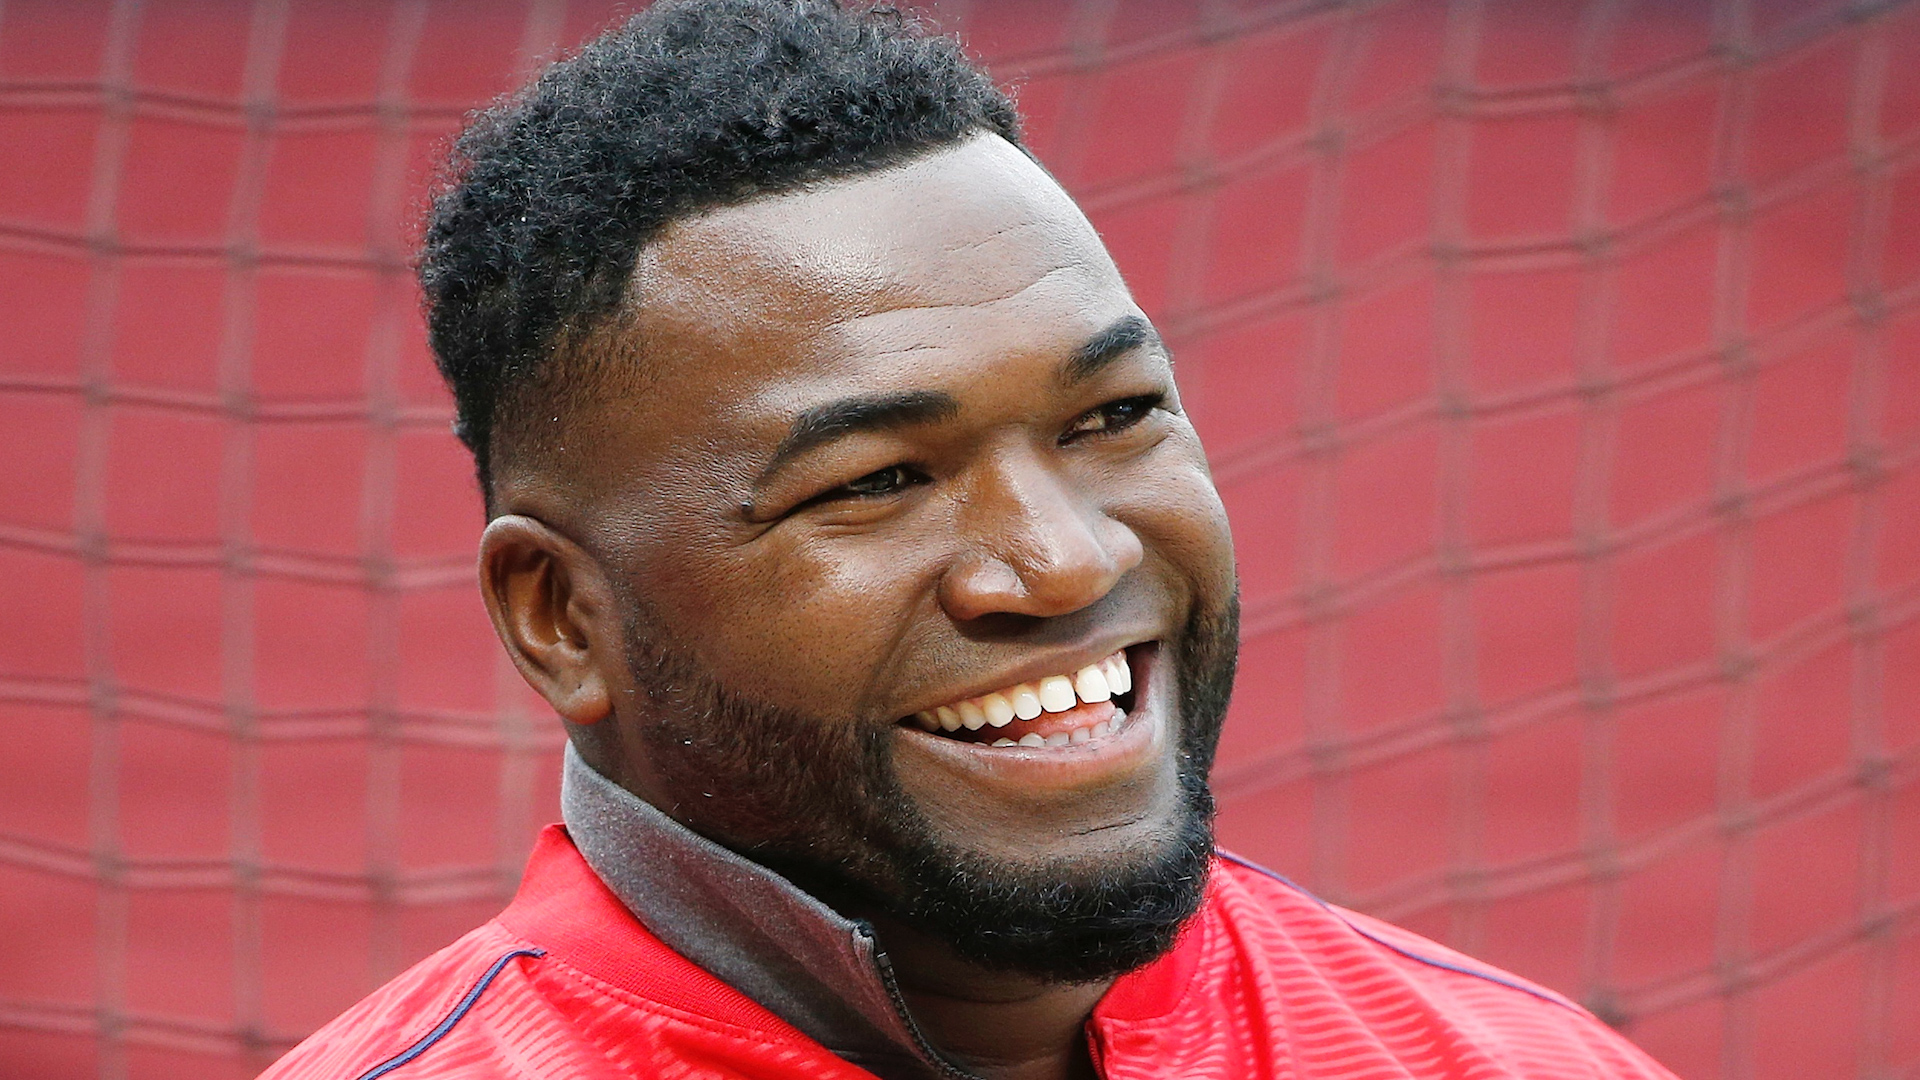 David Ortiz nearly loses $100,000 necklace in London sewer drain